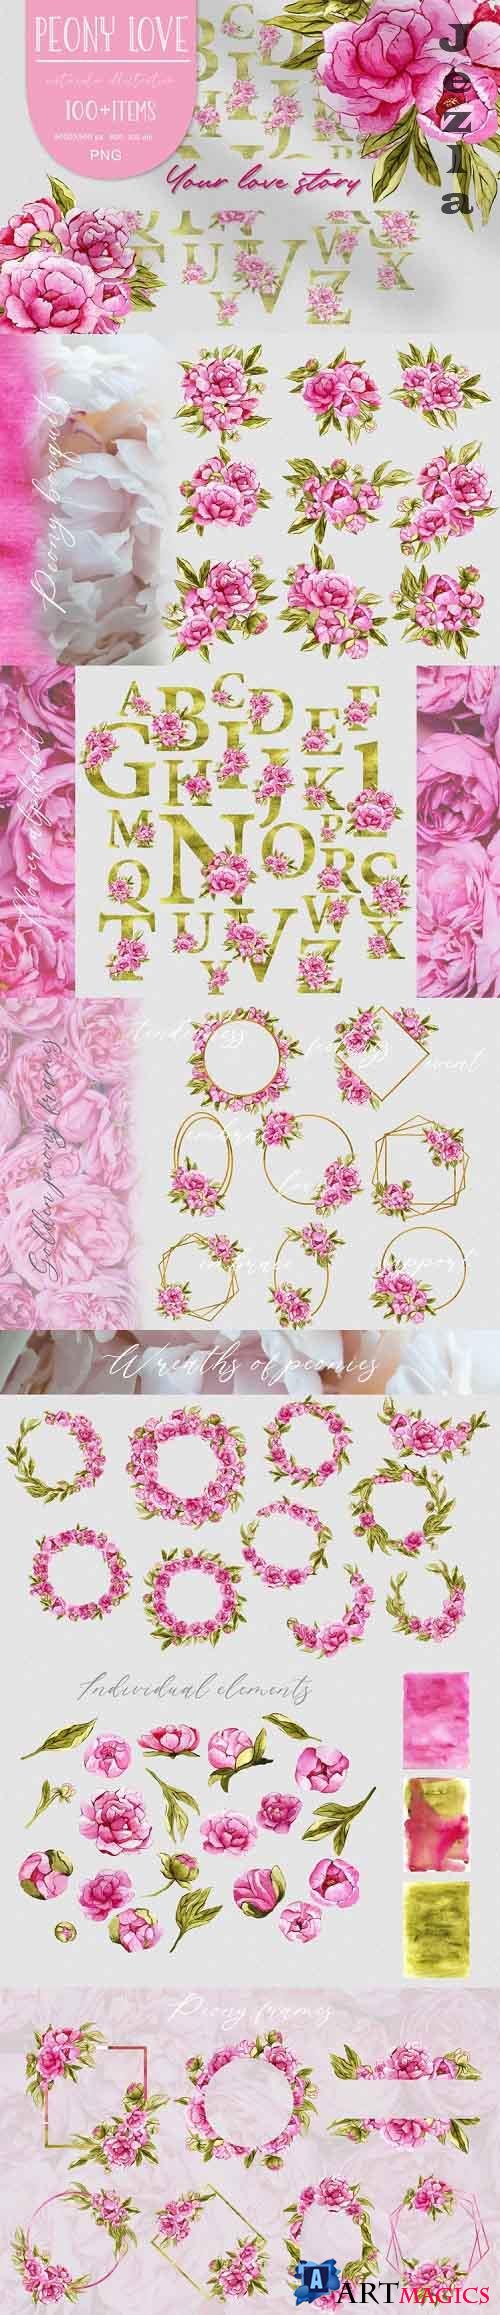 Watercolor floral set pink peony PNG - 974310